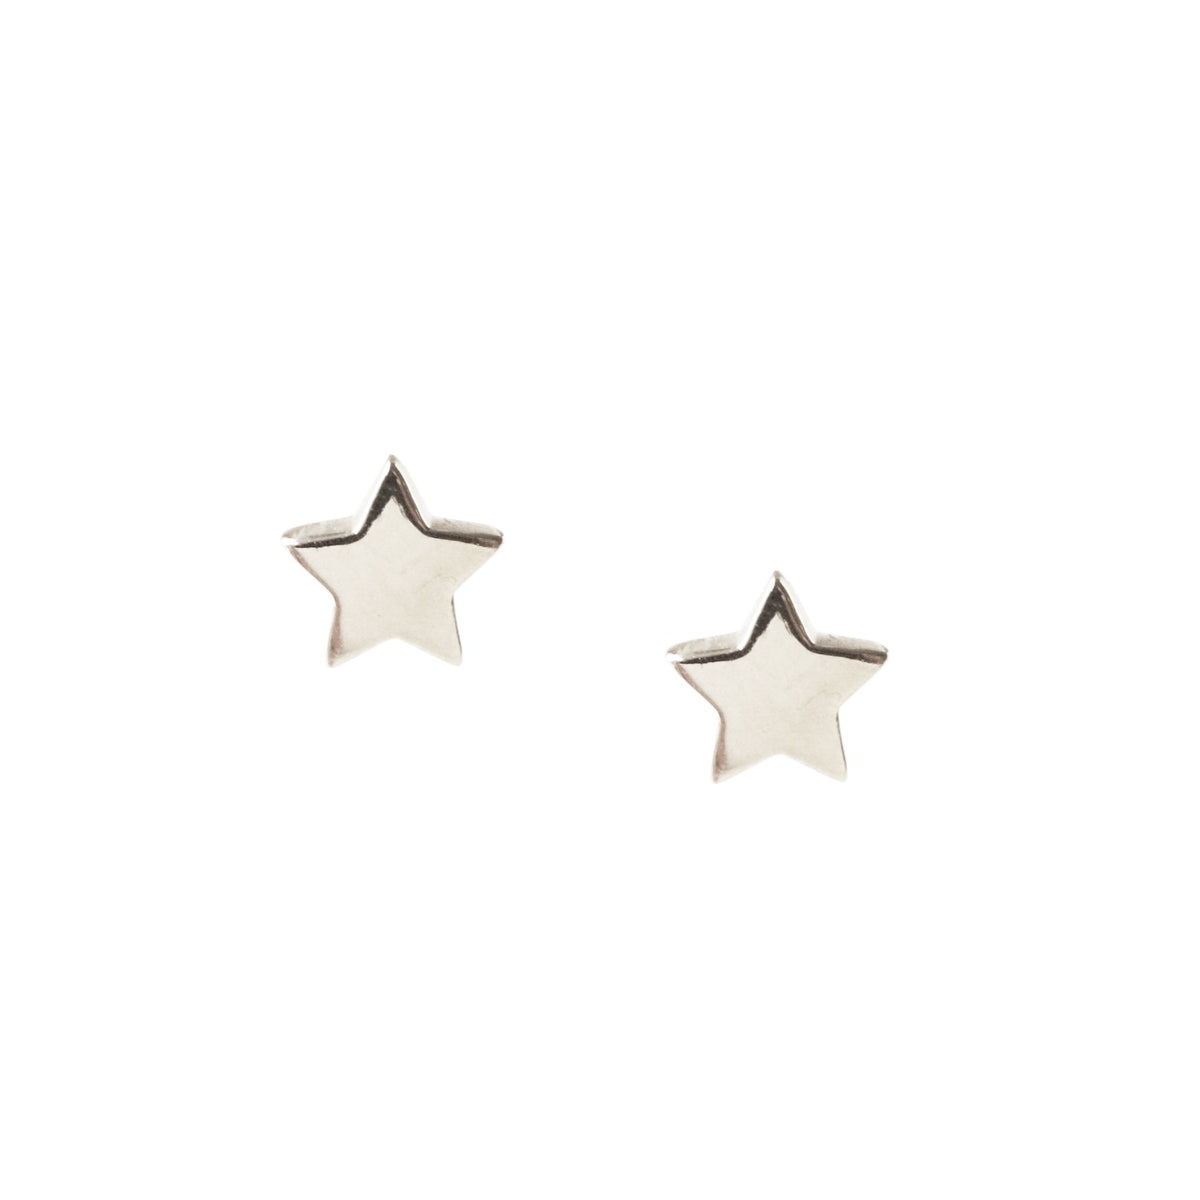 TINY POISE STAR STUDS - SILVER - SO PRETTY CARA COTTER